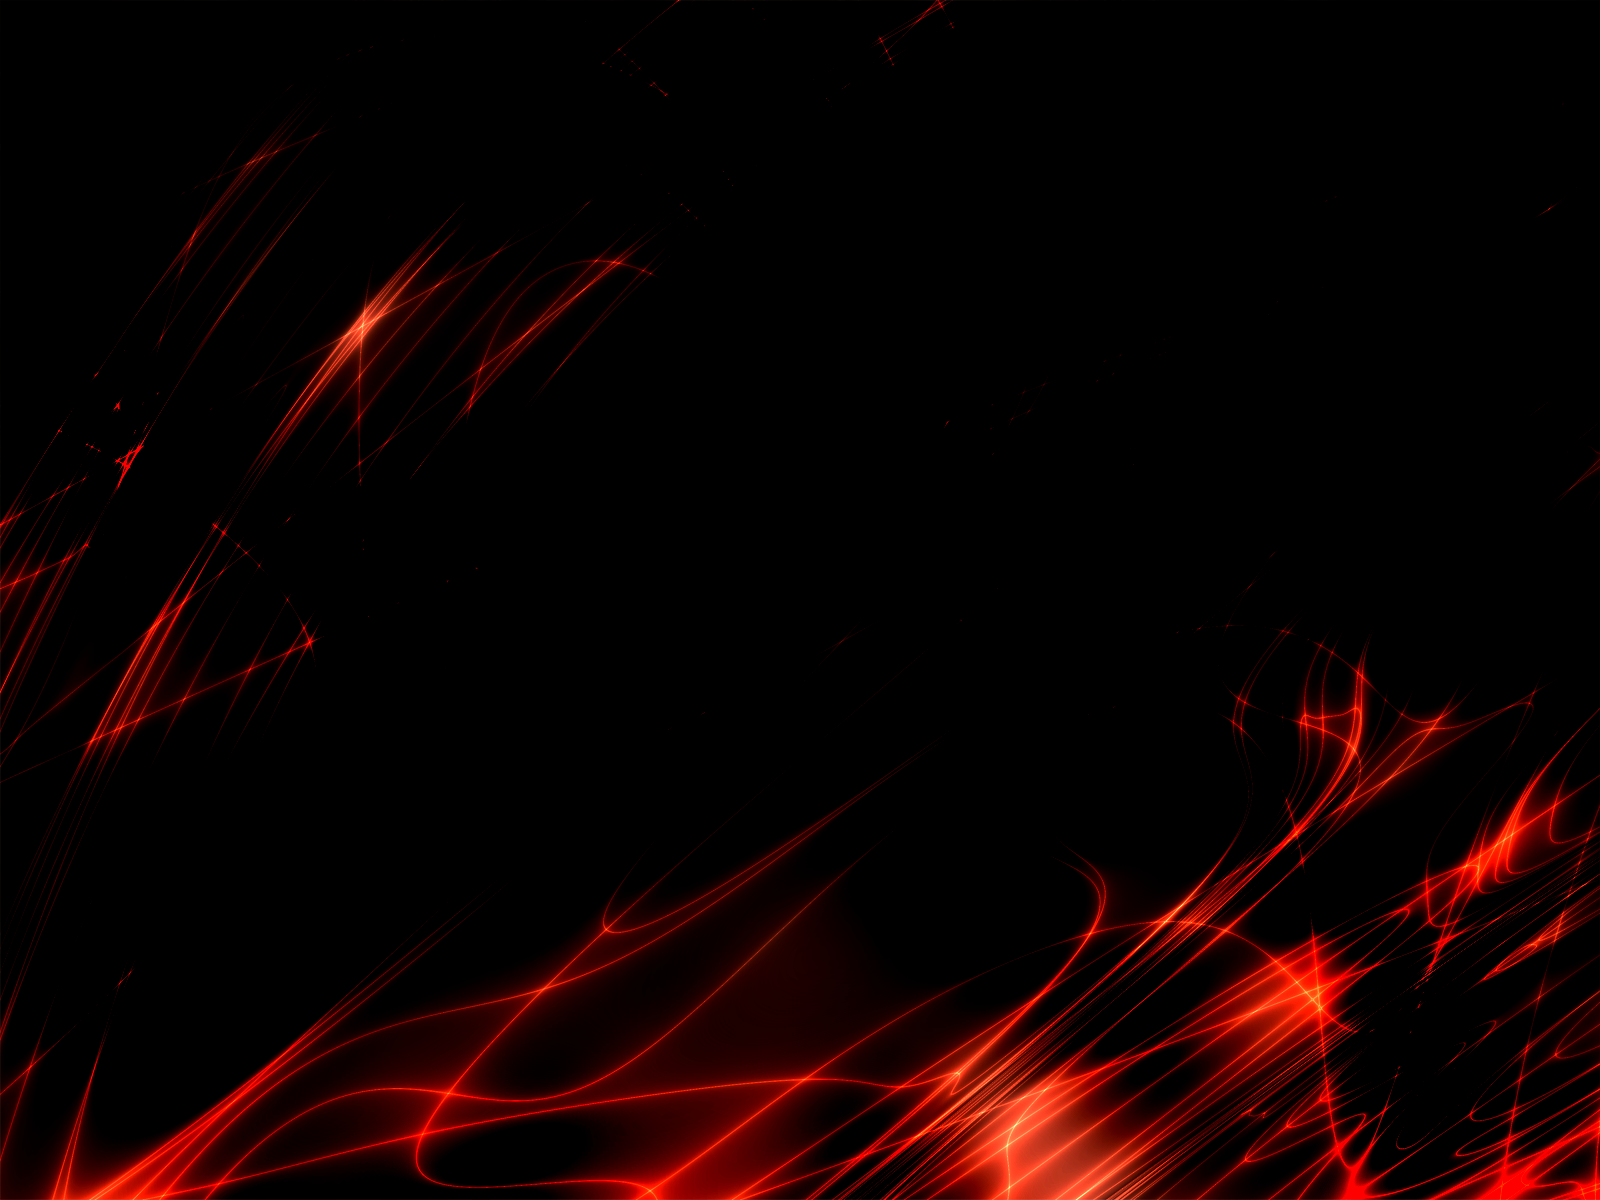 Awesome Black Themed Abstract Wallpaper Vol2